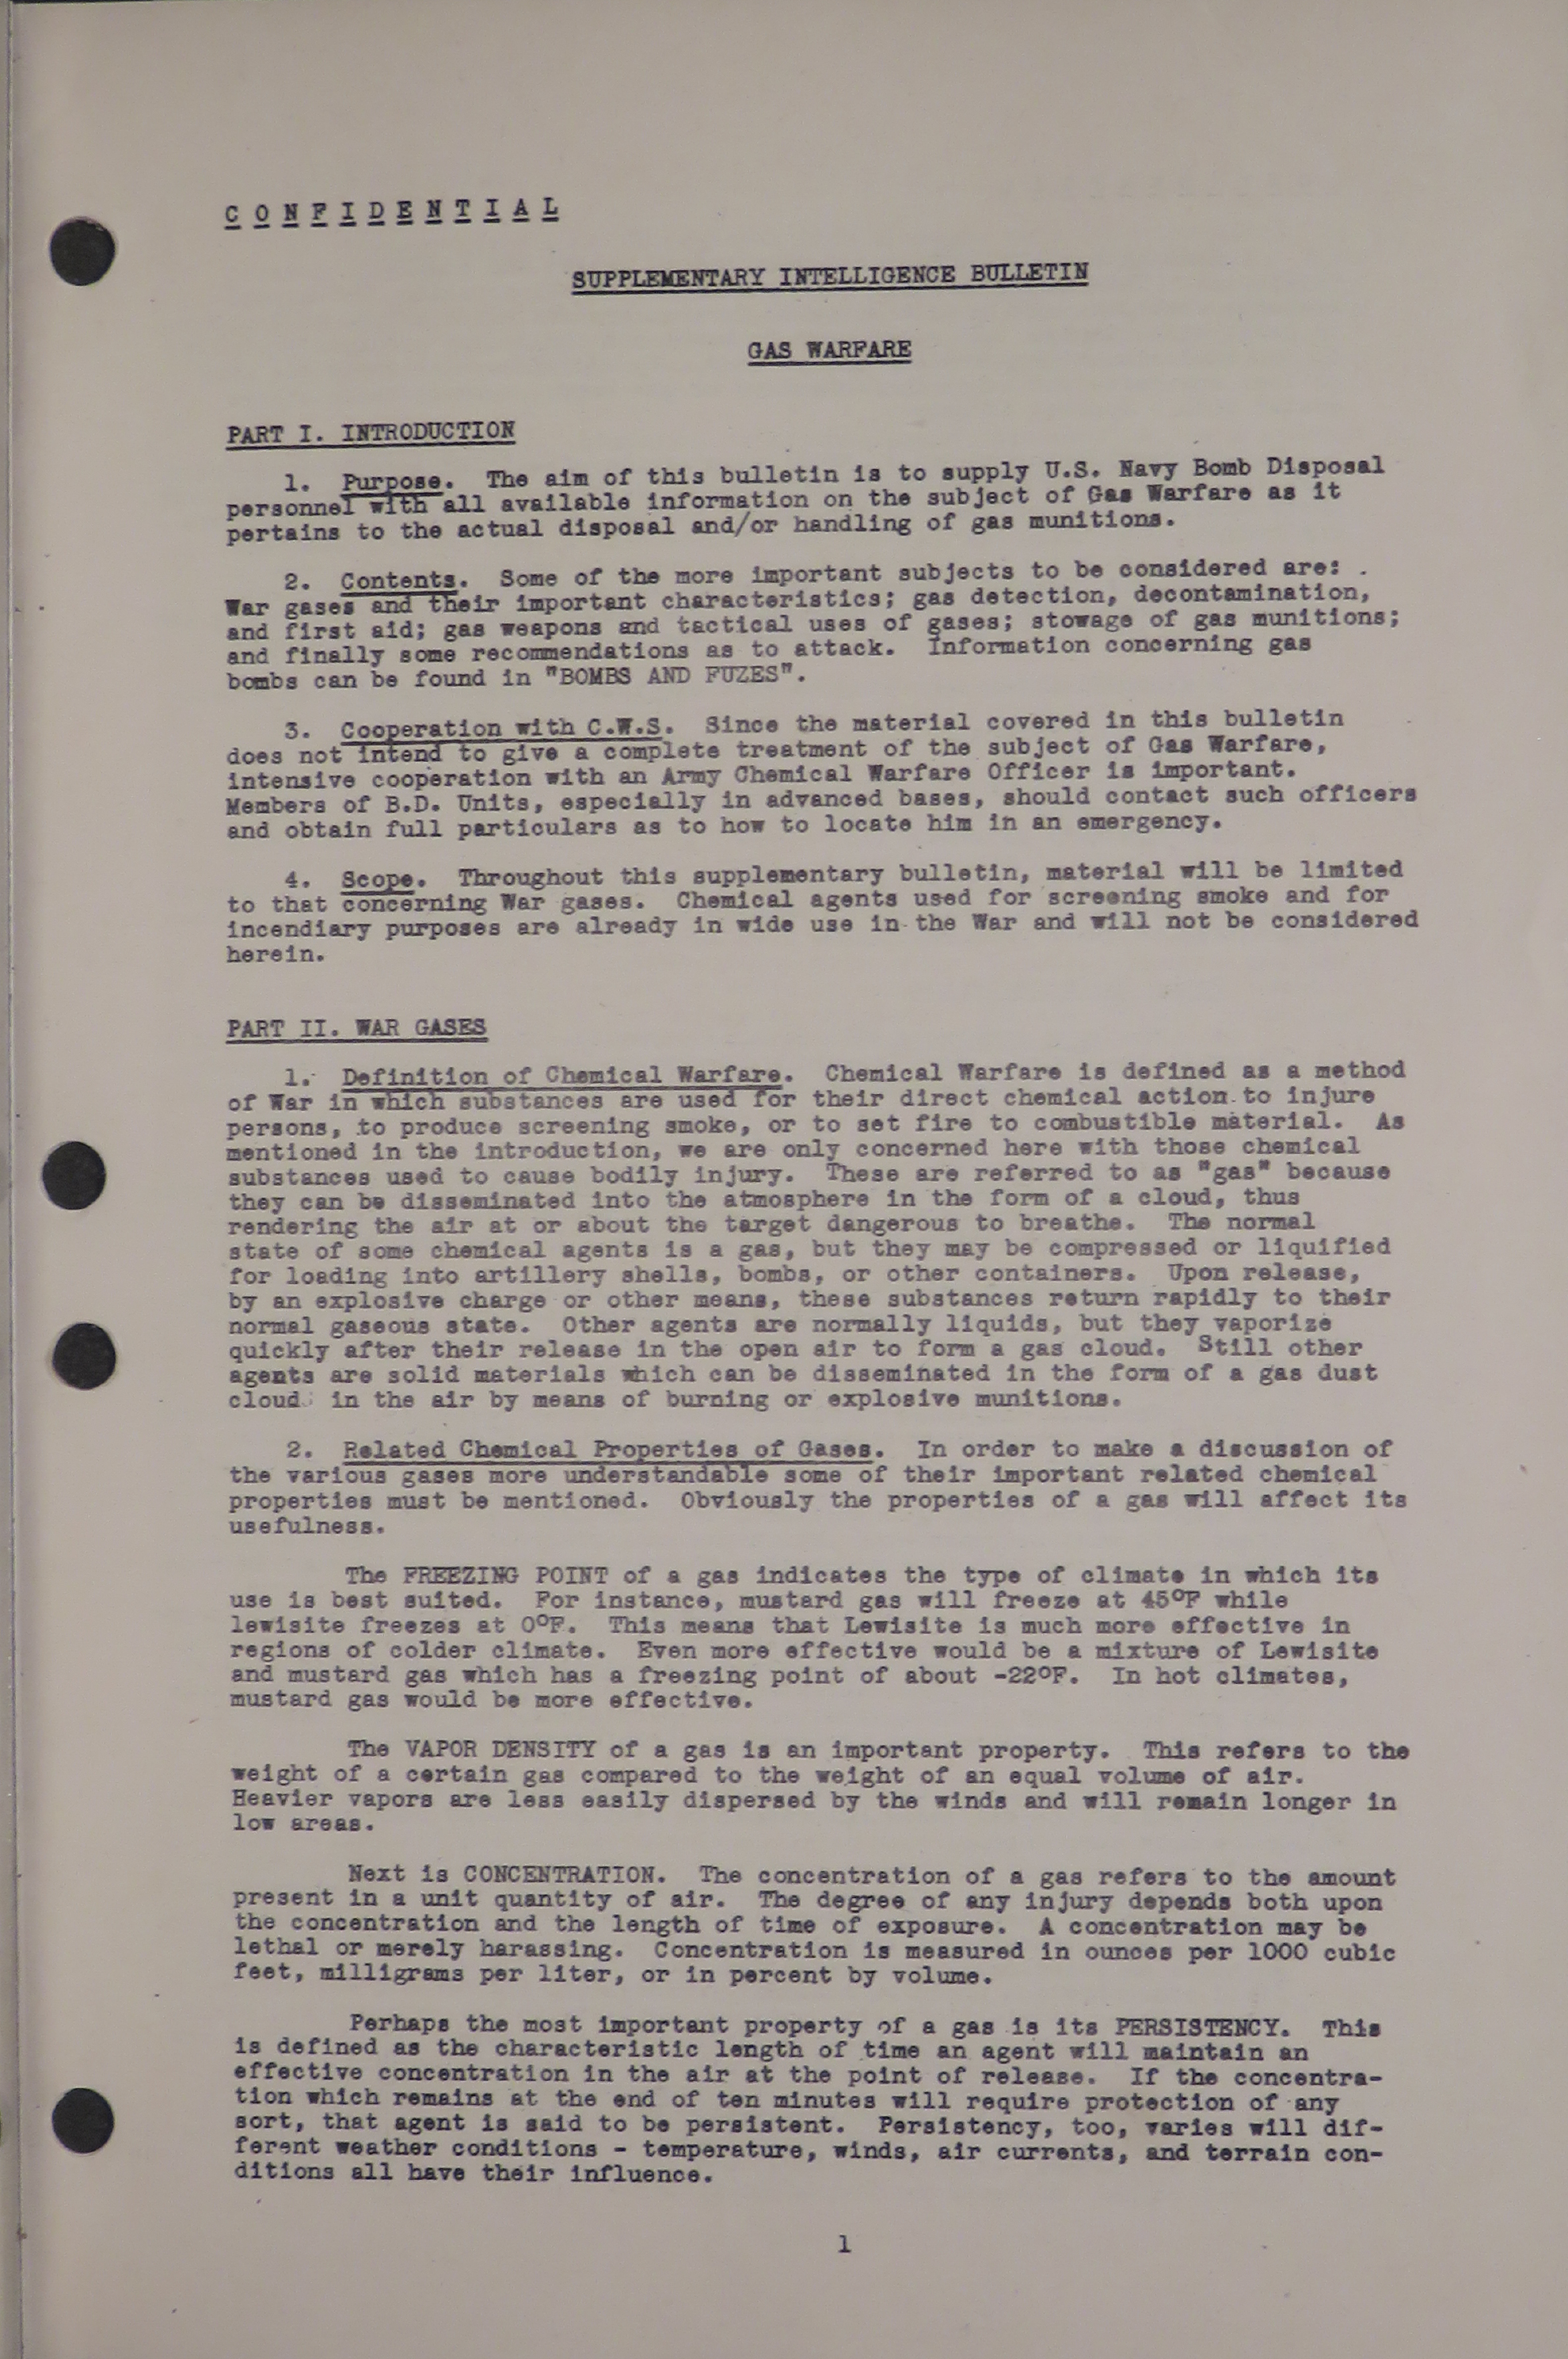 Sample page 3 from AirCorps Library document: U.S. Navy Bomb Disposal Intelligence Bulletin for Gas Warfare